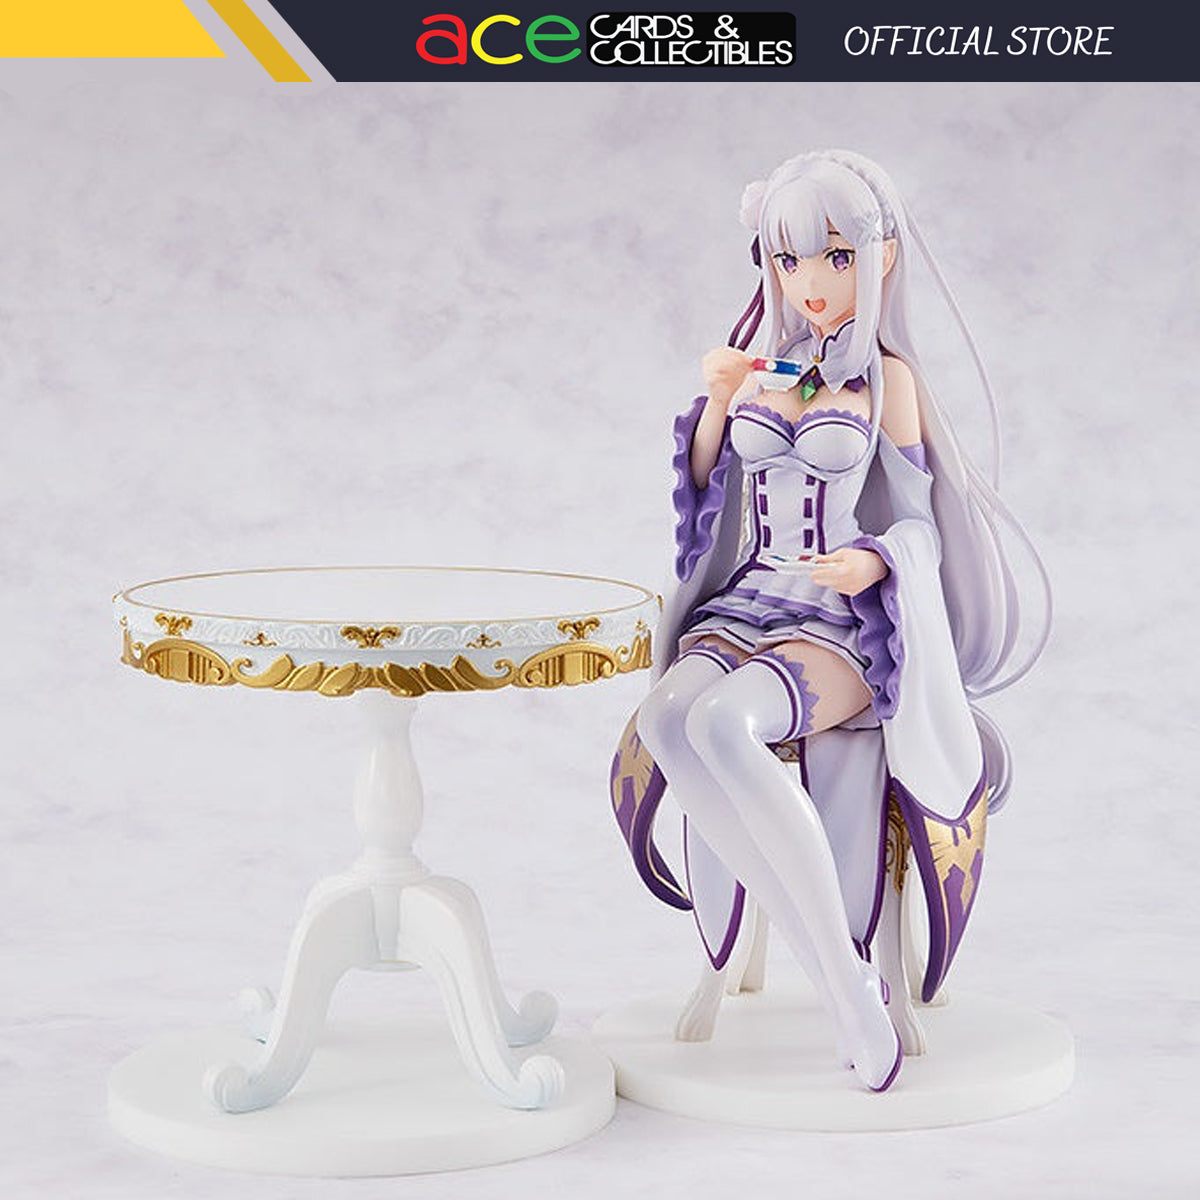 Re: Zero -Starting Life in Another World- "Emilia" (Tea Party Ver.)-Good Smile Company-Ace Cards & Collectibles